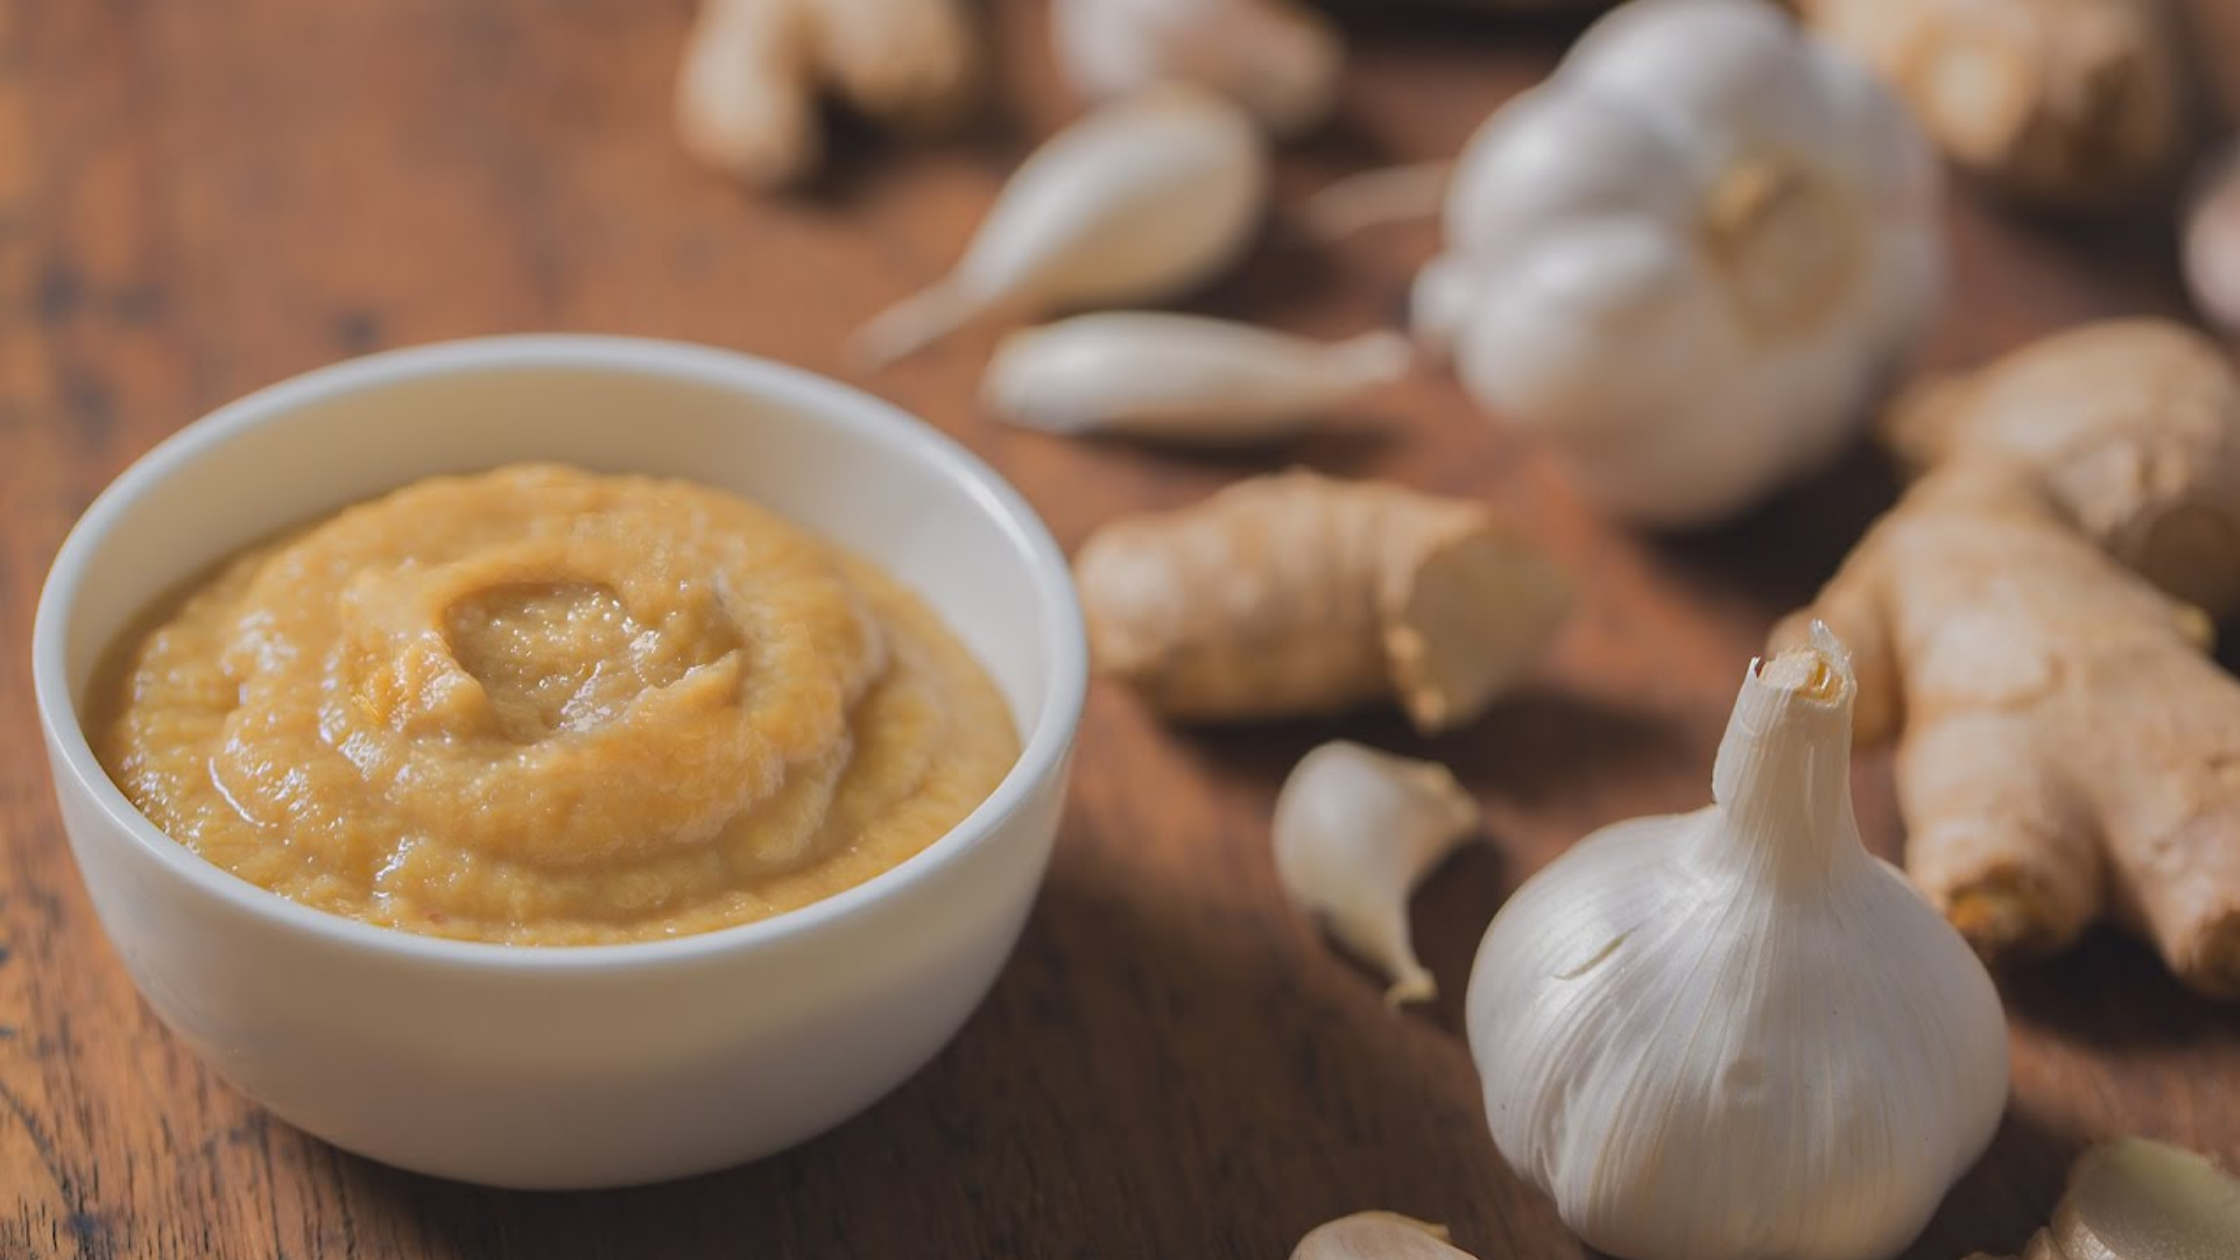 Why Do We Need Ginger Garlic Paste for Cooking?